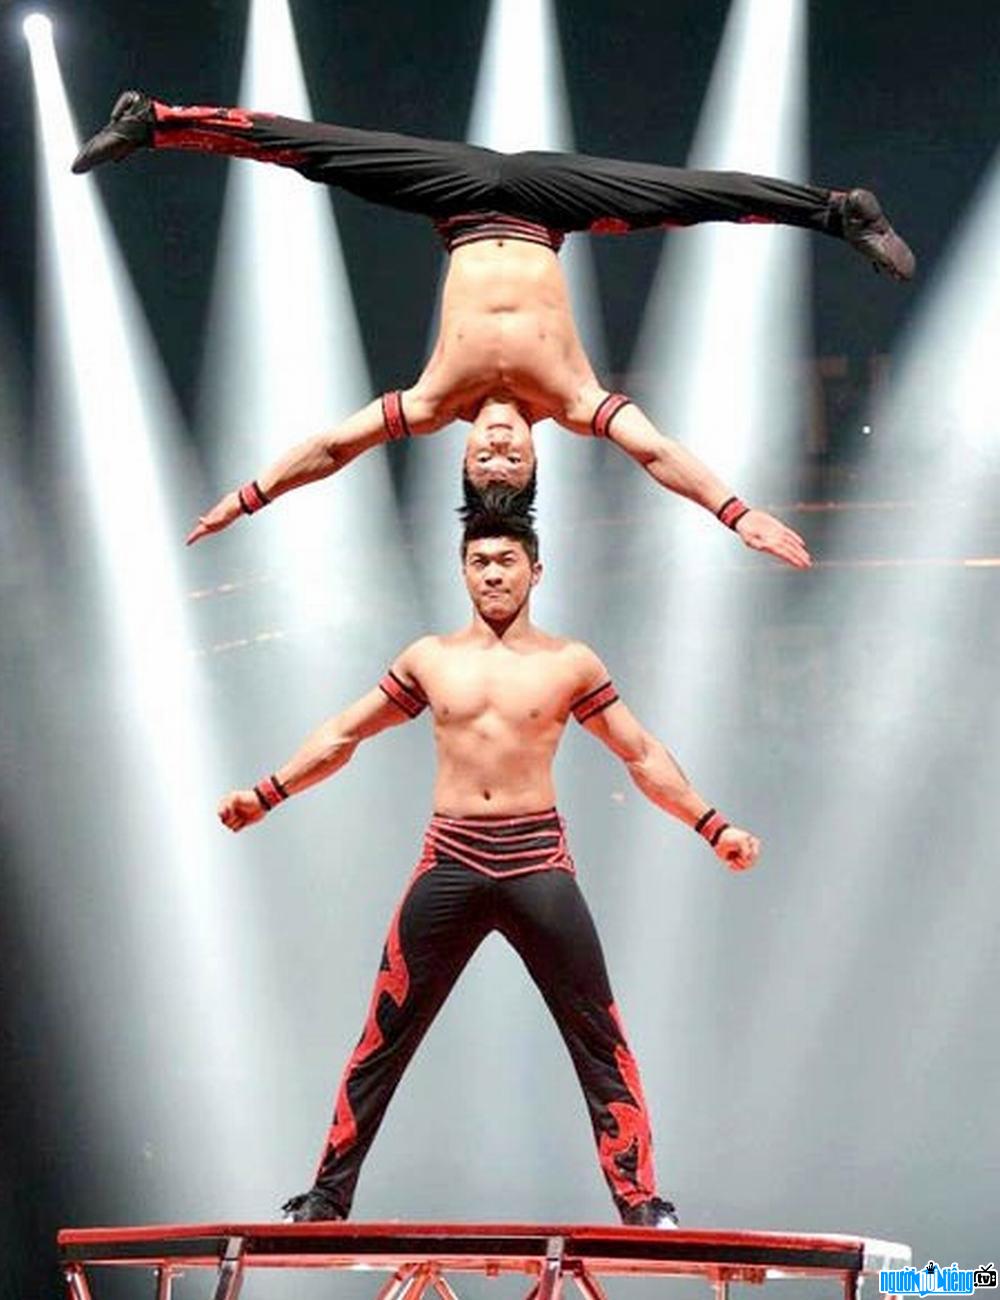  Two brothers Quoc Co - Quoc Nghiep in a special performance of "Performance" by circus artist Quoc Co - Quoc Nghiep